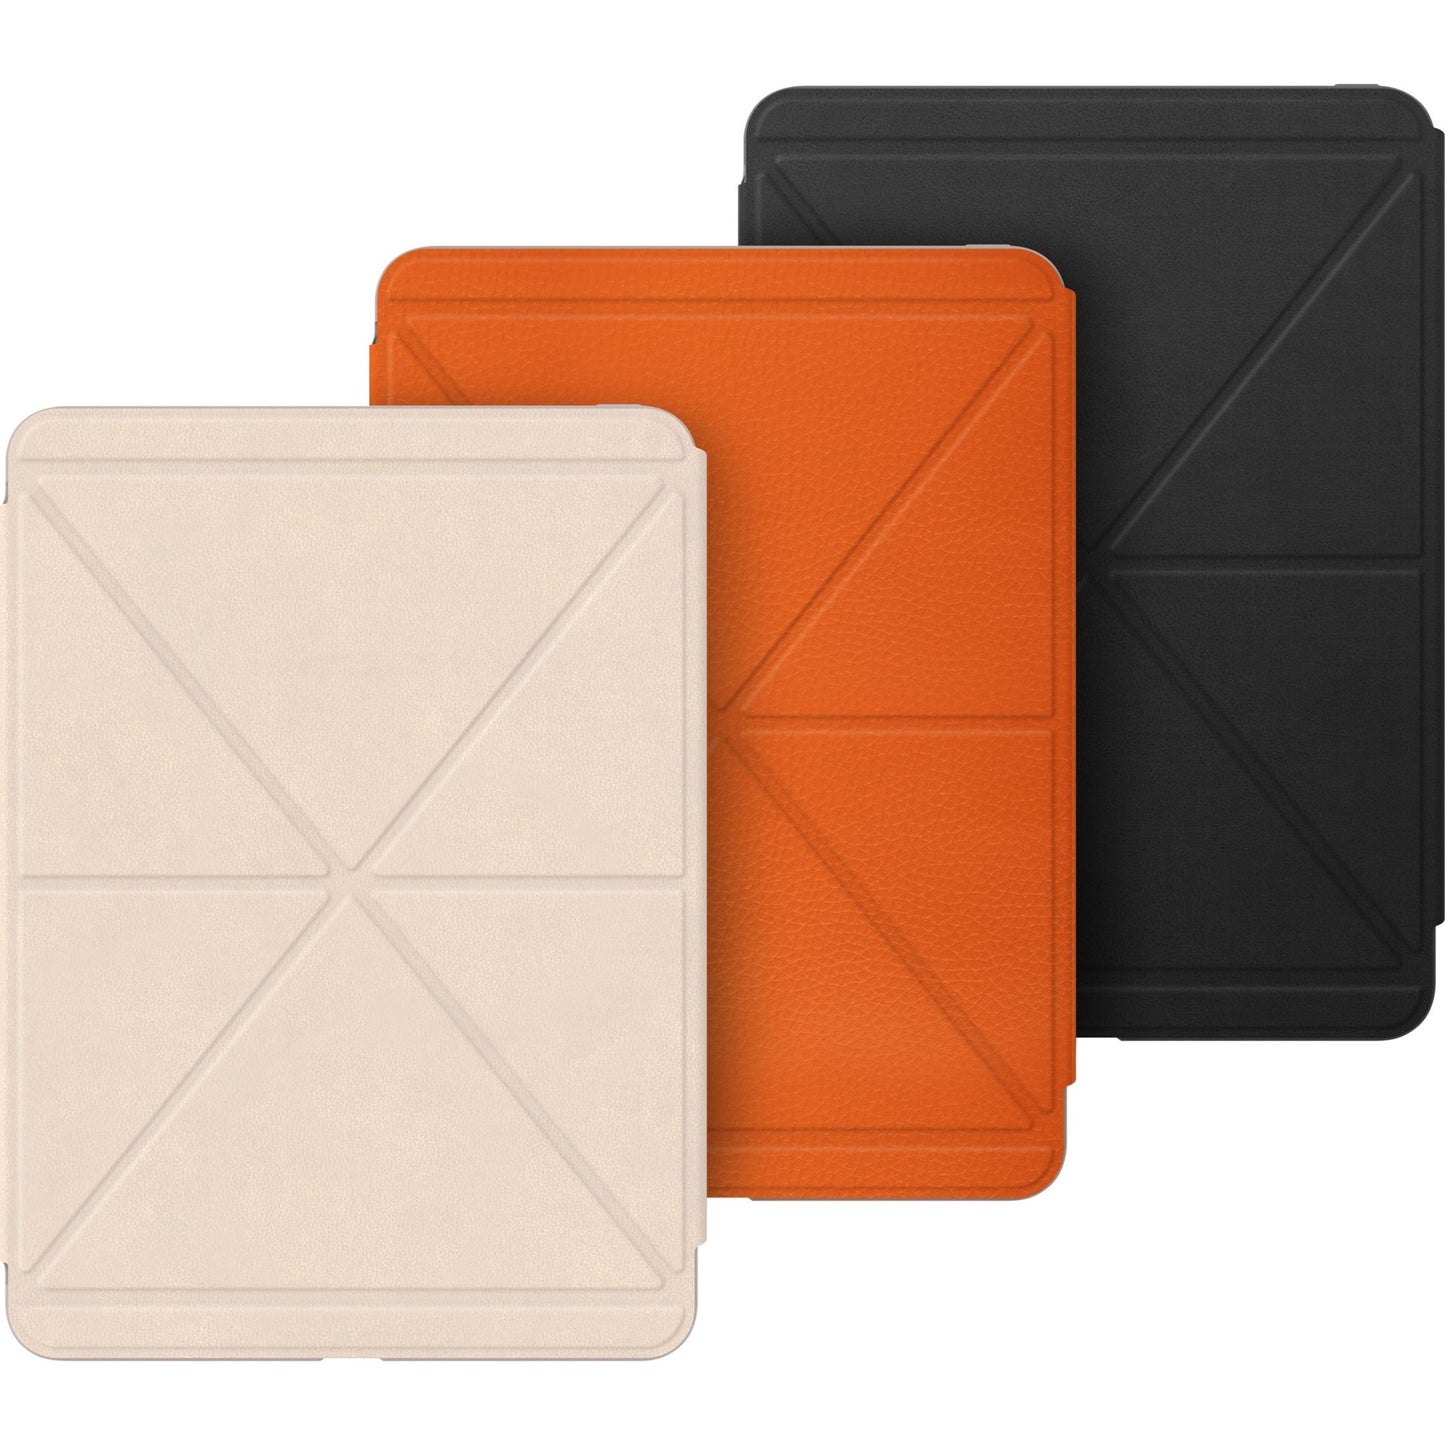 Moshi VersaCover Carrying Case for 11" Apple iPad Pro Tablet - Sienna Orange